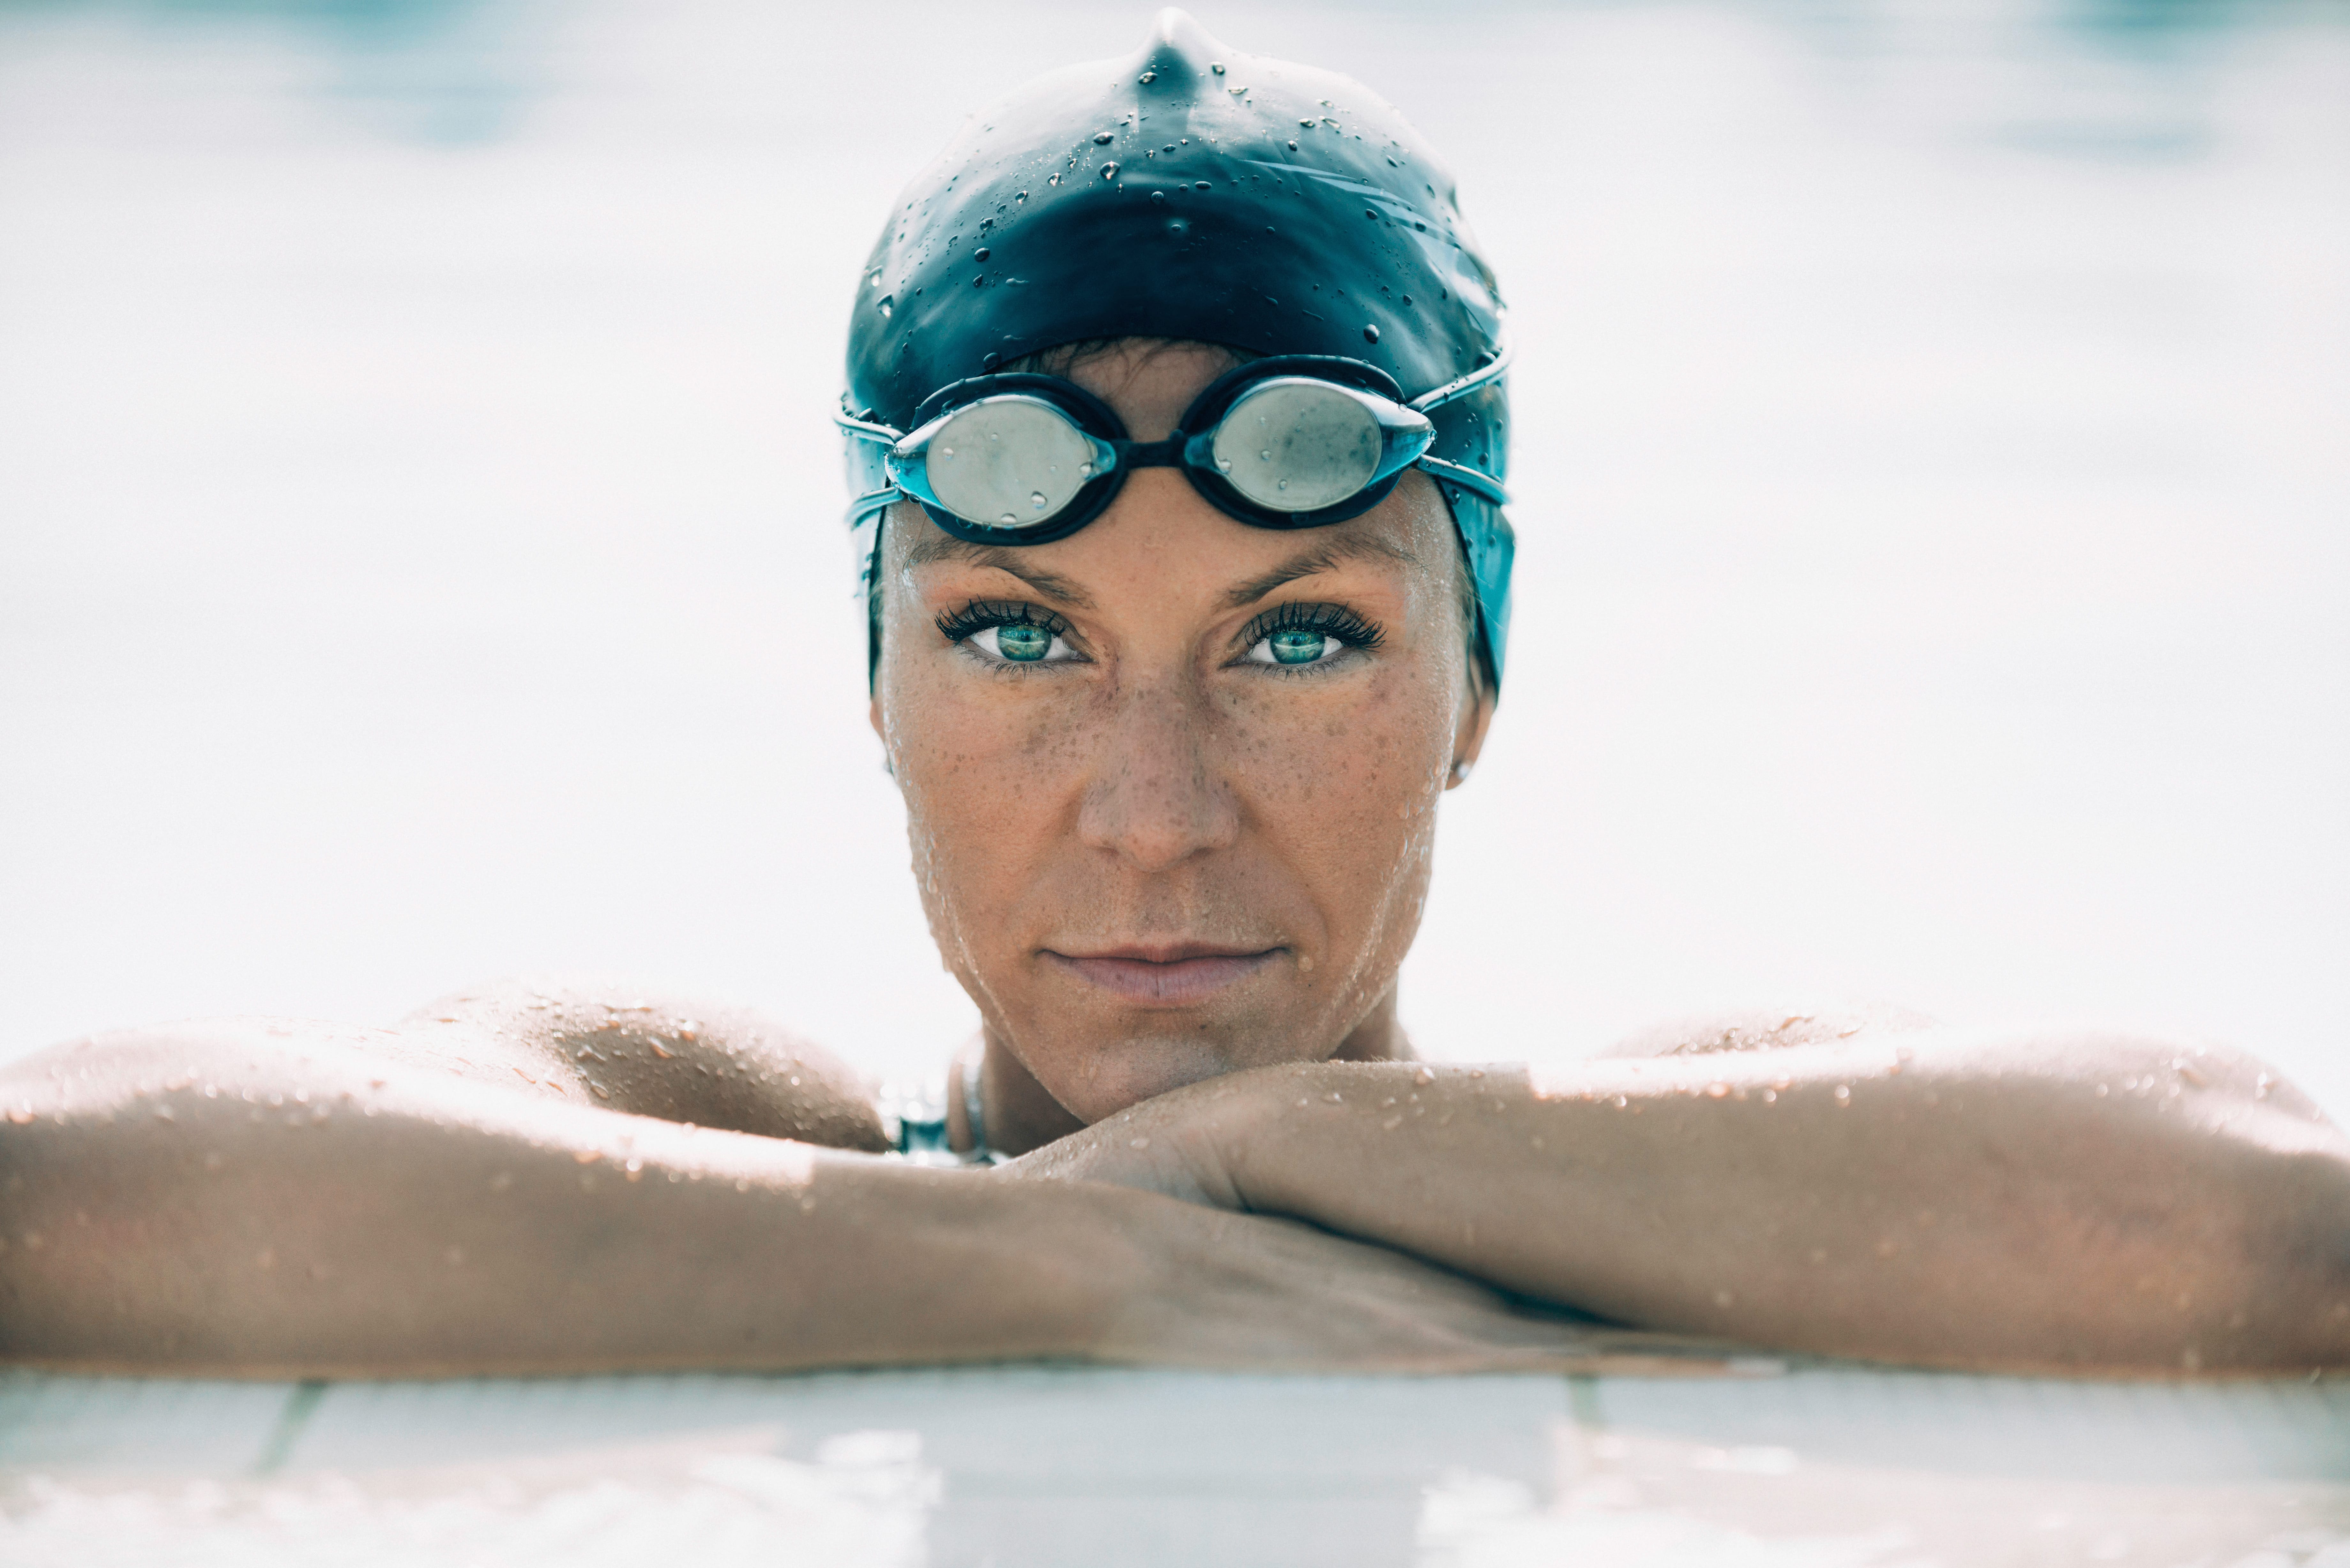 How to train like an Olympic swimmer